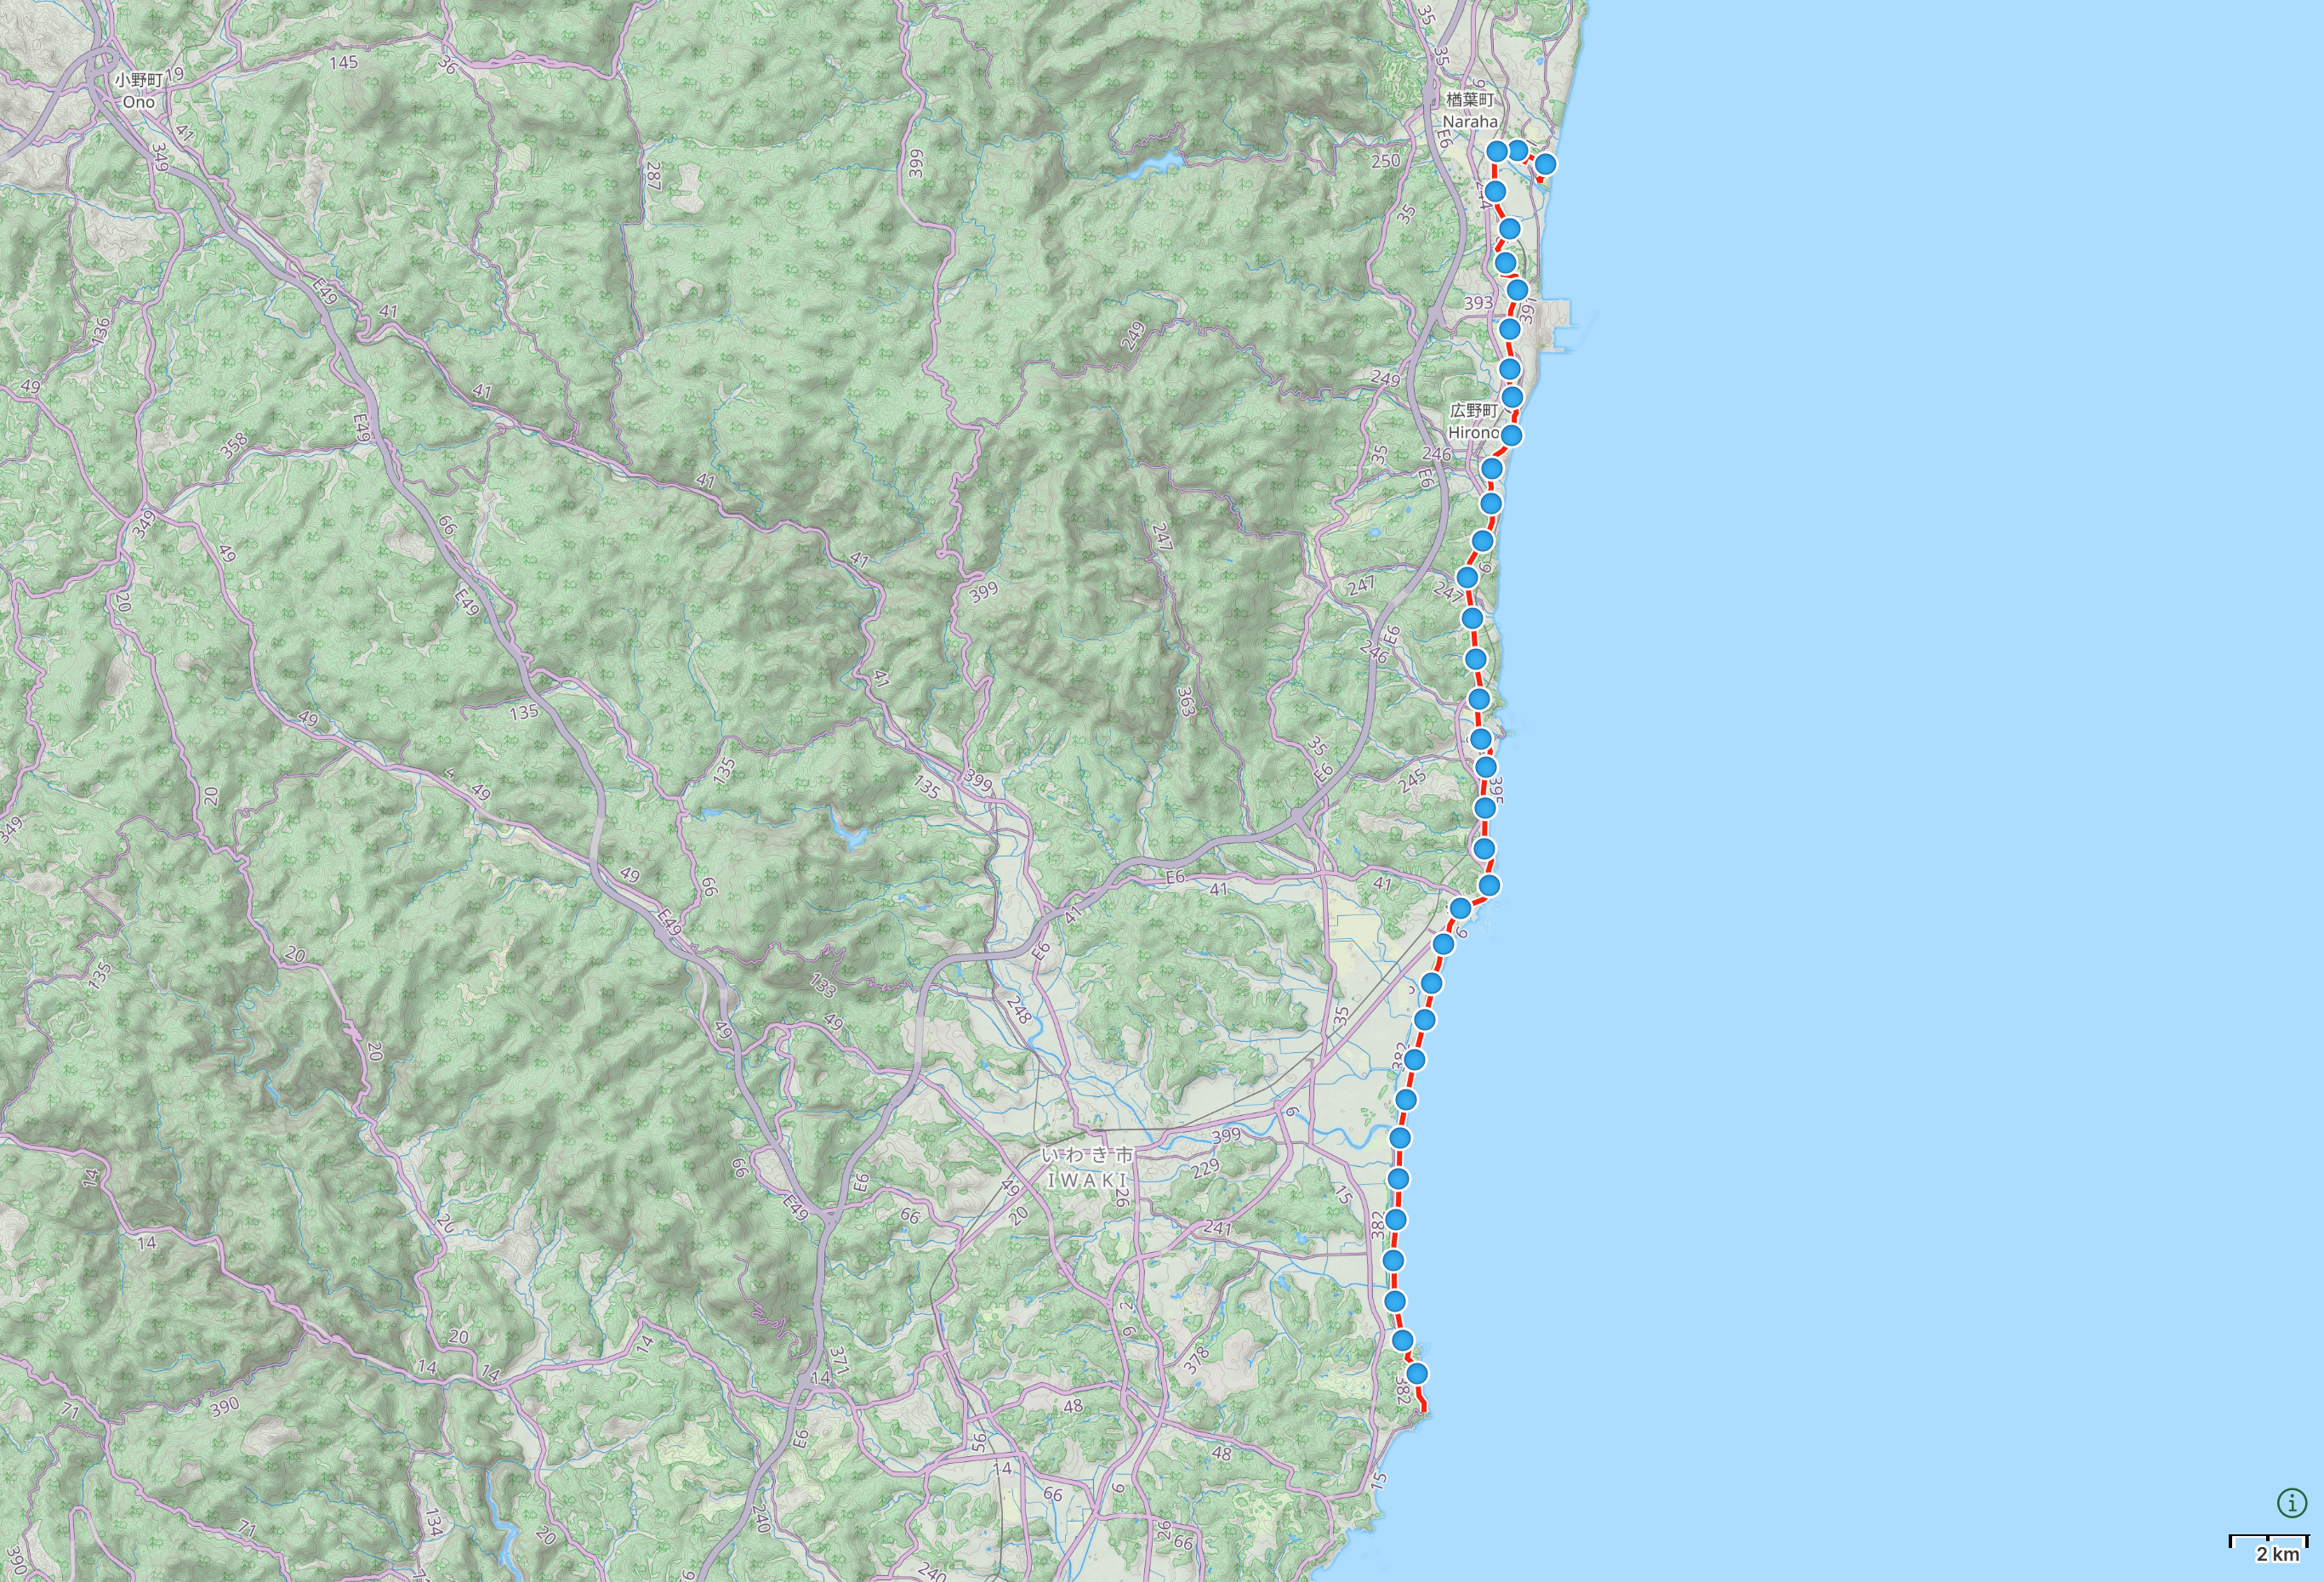 Map of Fukushima with author’s route from Shioyazaki Lighthouse to Naraha highlighted.